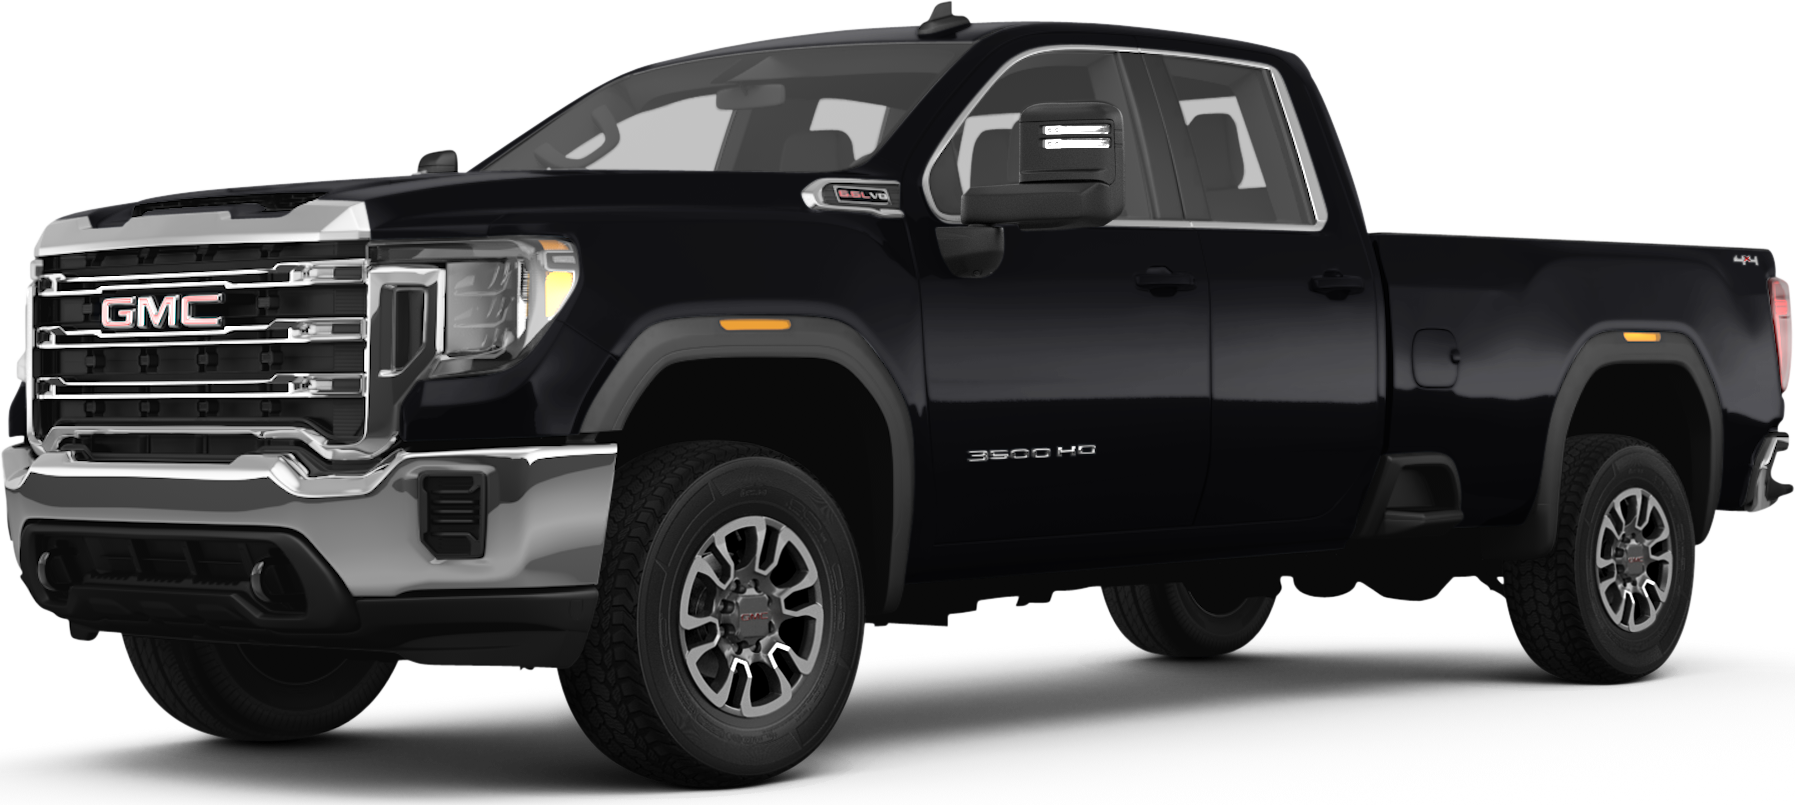 2024 GMC Sierra 3500 HD Double Cab Price, Reviews, Pictures & More